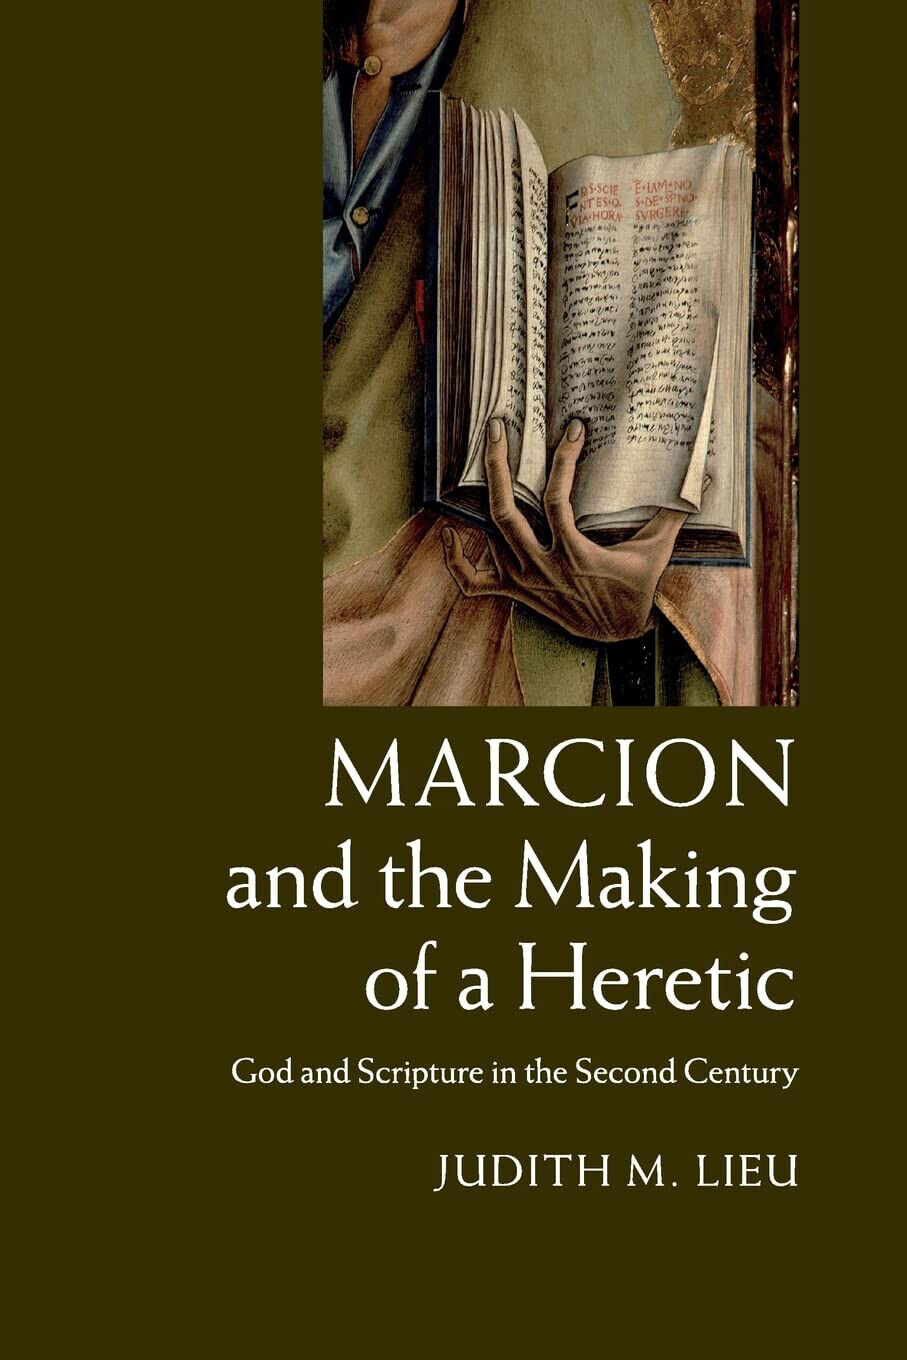 Marcion and the Making of a Heretic - Judith M. Lieu - Cambridge, 2022